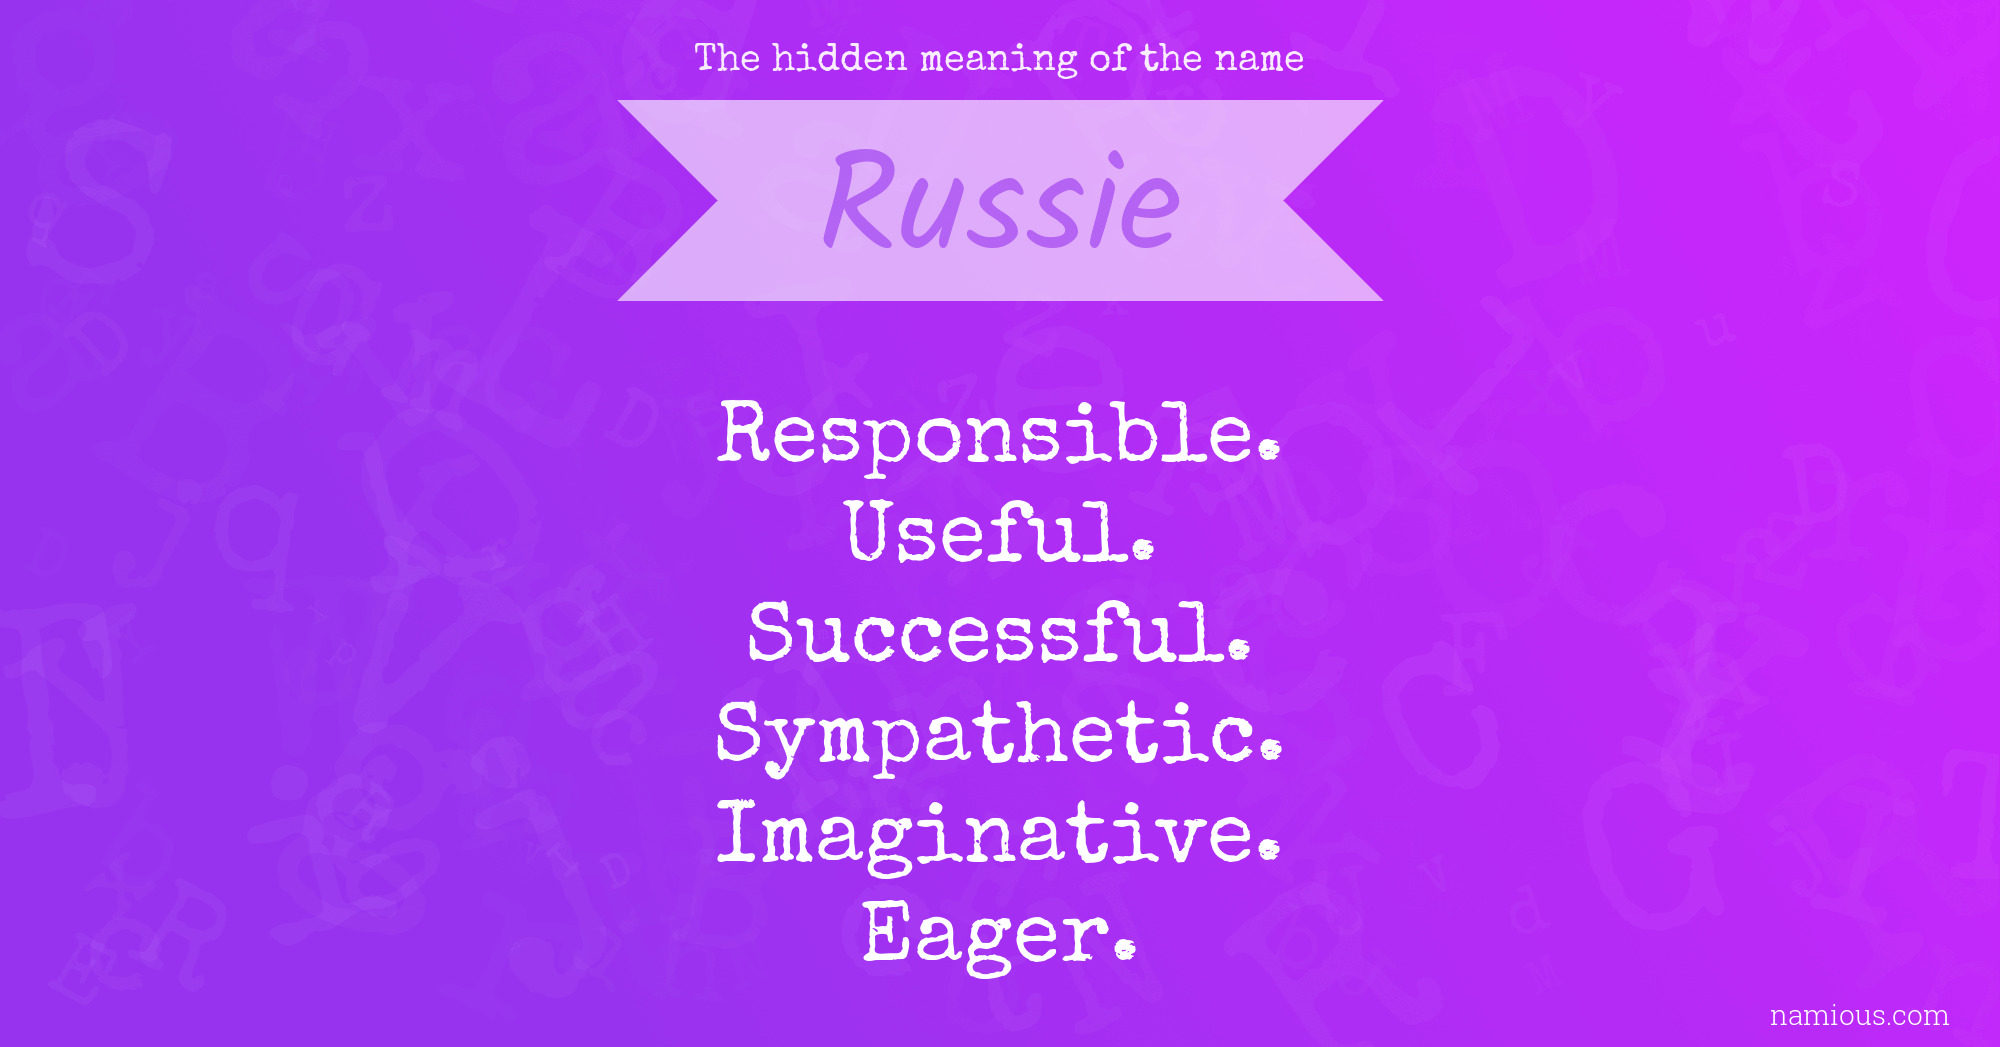 The hidden meaning of the name Russie